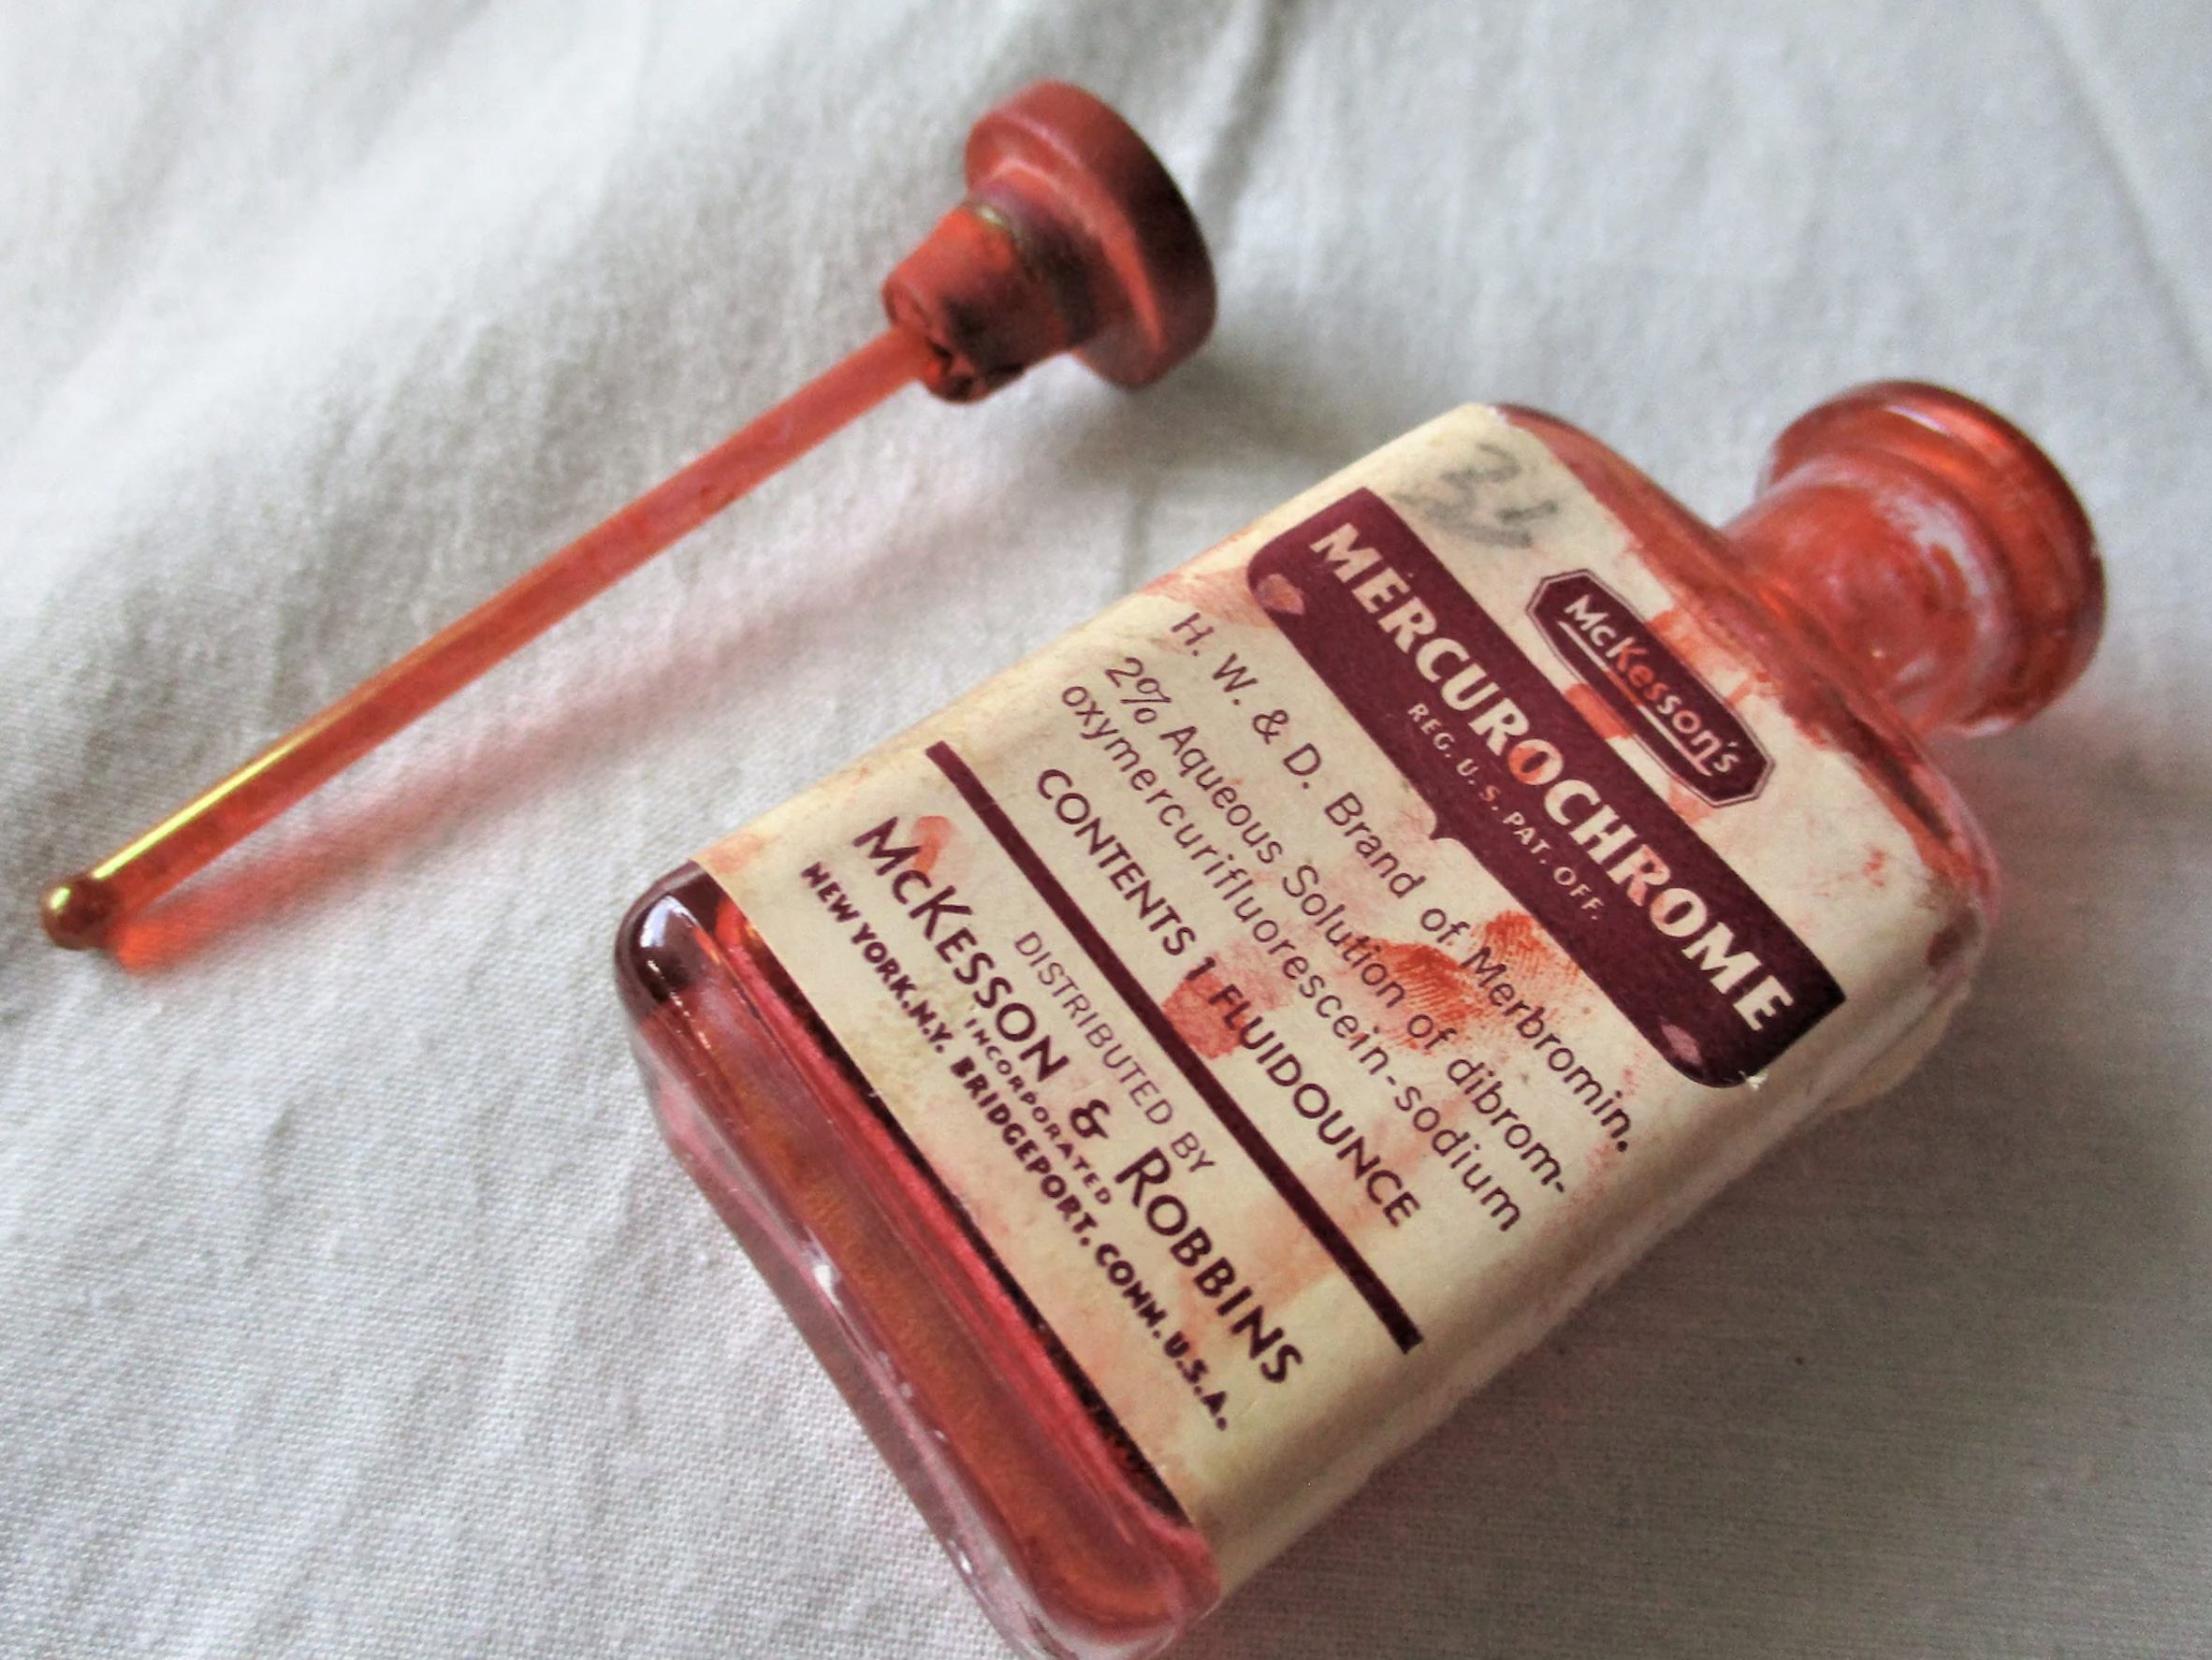 A vintage bottle of Mercurochrome antiseptic with a glass dropper detached. The label shows 2% aqueous solution and manufacturer details: McKesson &amp;amp; Robbins